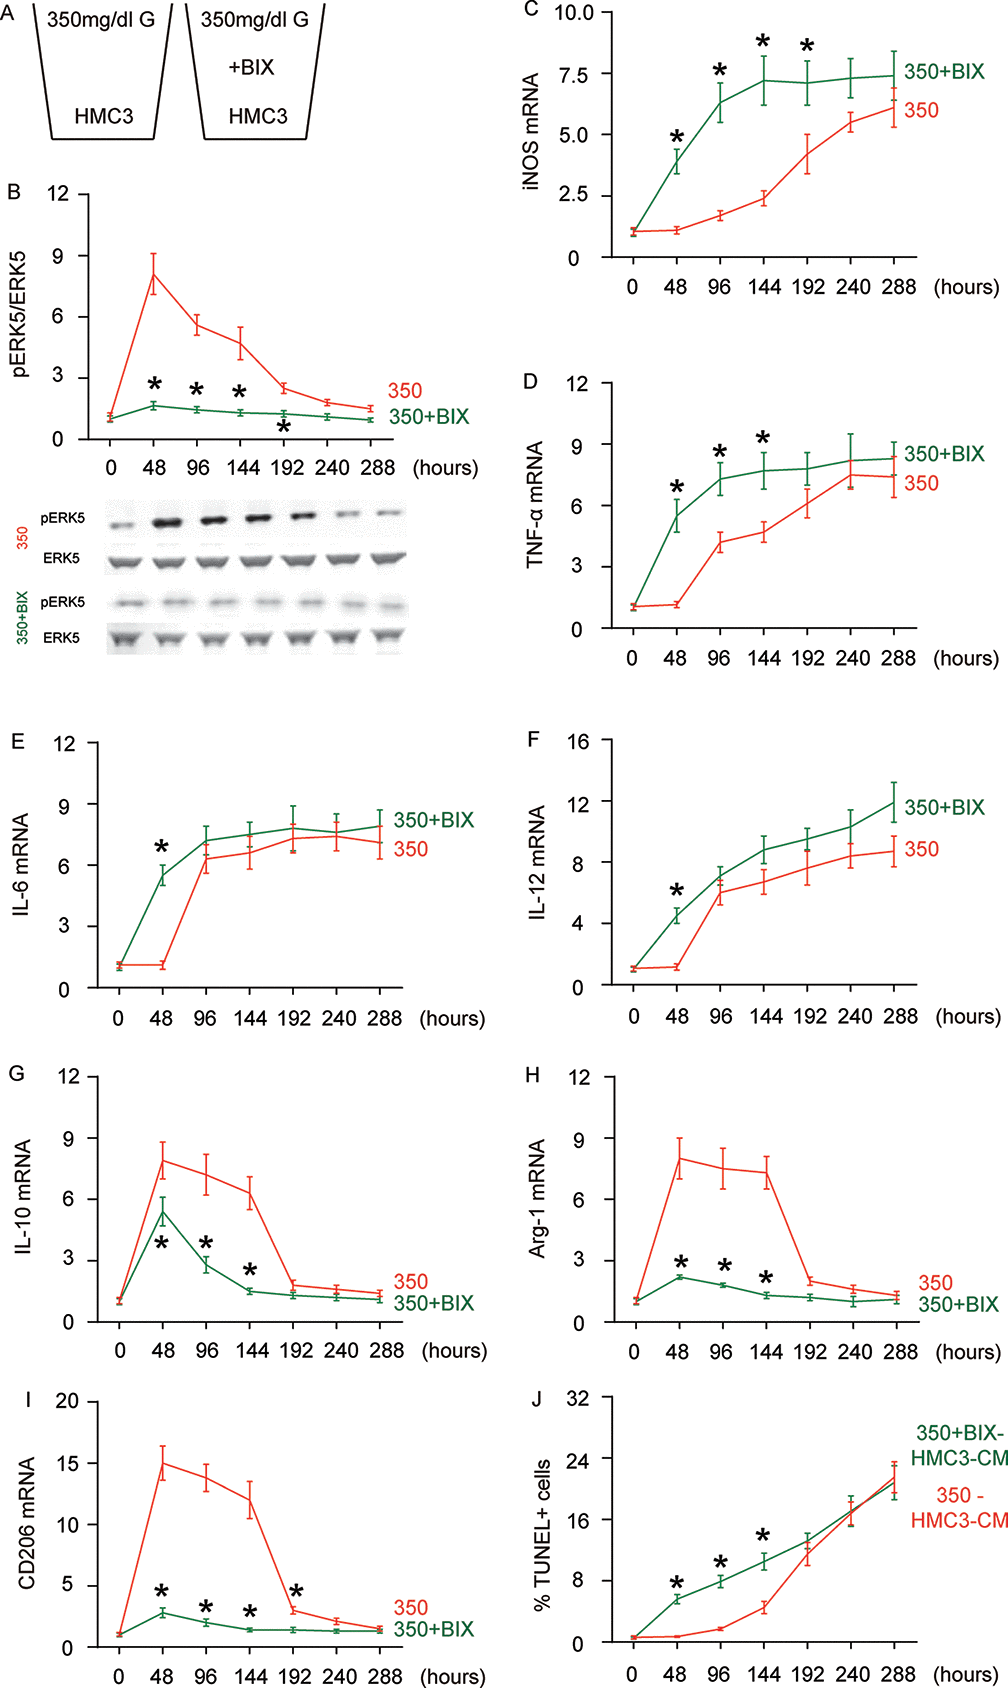 Suppressing ERK5 activation prevents HG-induced M2a polarization of microglia and induces earlier polarization of M2b-like followed by M1-like microglia. (A) BIX021895 (BIX) was applied to the HG-cultured microglia. (B) Western blot for pERK5, compared to the total ERK5 levels in HG- cultured microglia at different time courses, with or without BIX. (C–I) RT-qPCR for iNOS (C), TNF-α (D), IL-6 (E), IL-12 (F), IL-10 (G), Arg-1 (H) and CD206 (I) mRNA levels in HG- cultured microglia at different time points. (J) TUNEL assay on HCN-2 cells. N=5. *p